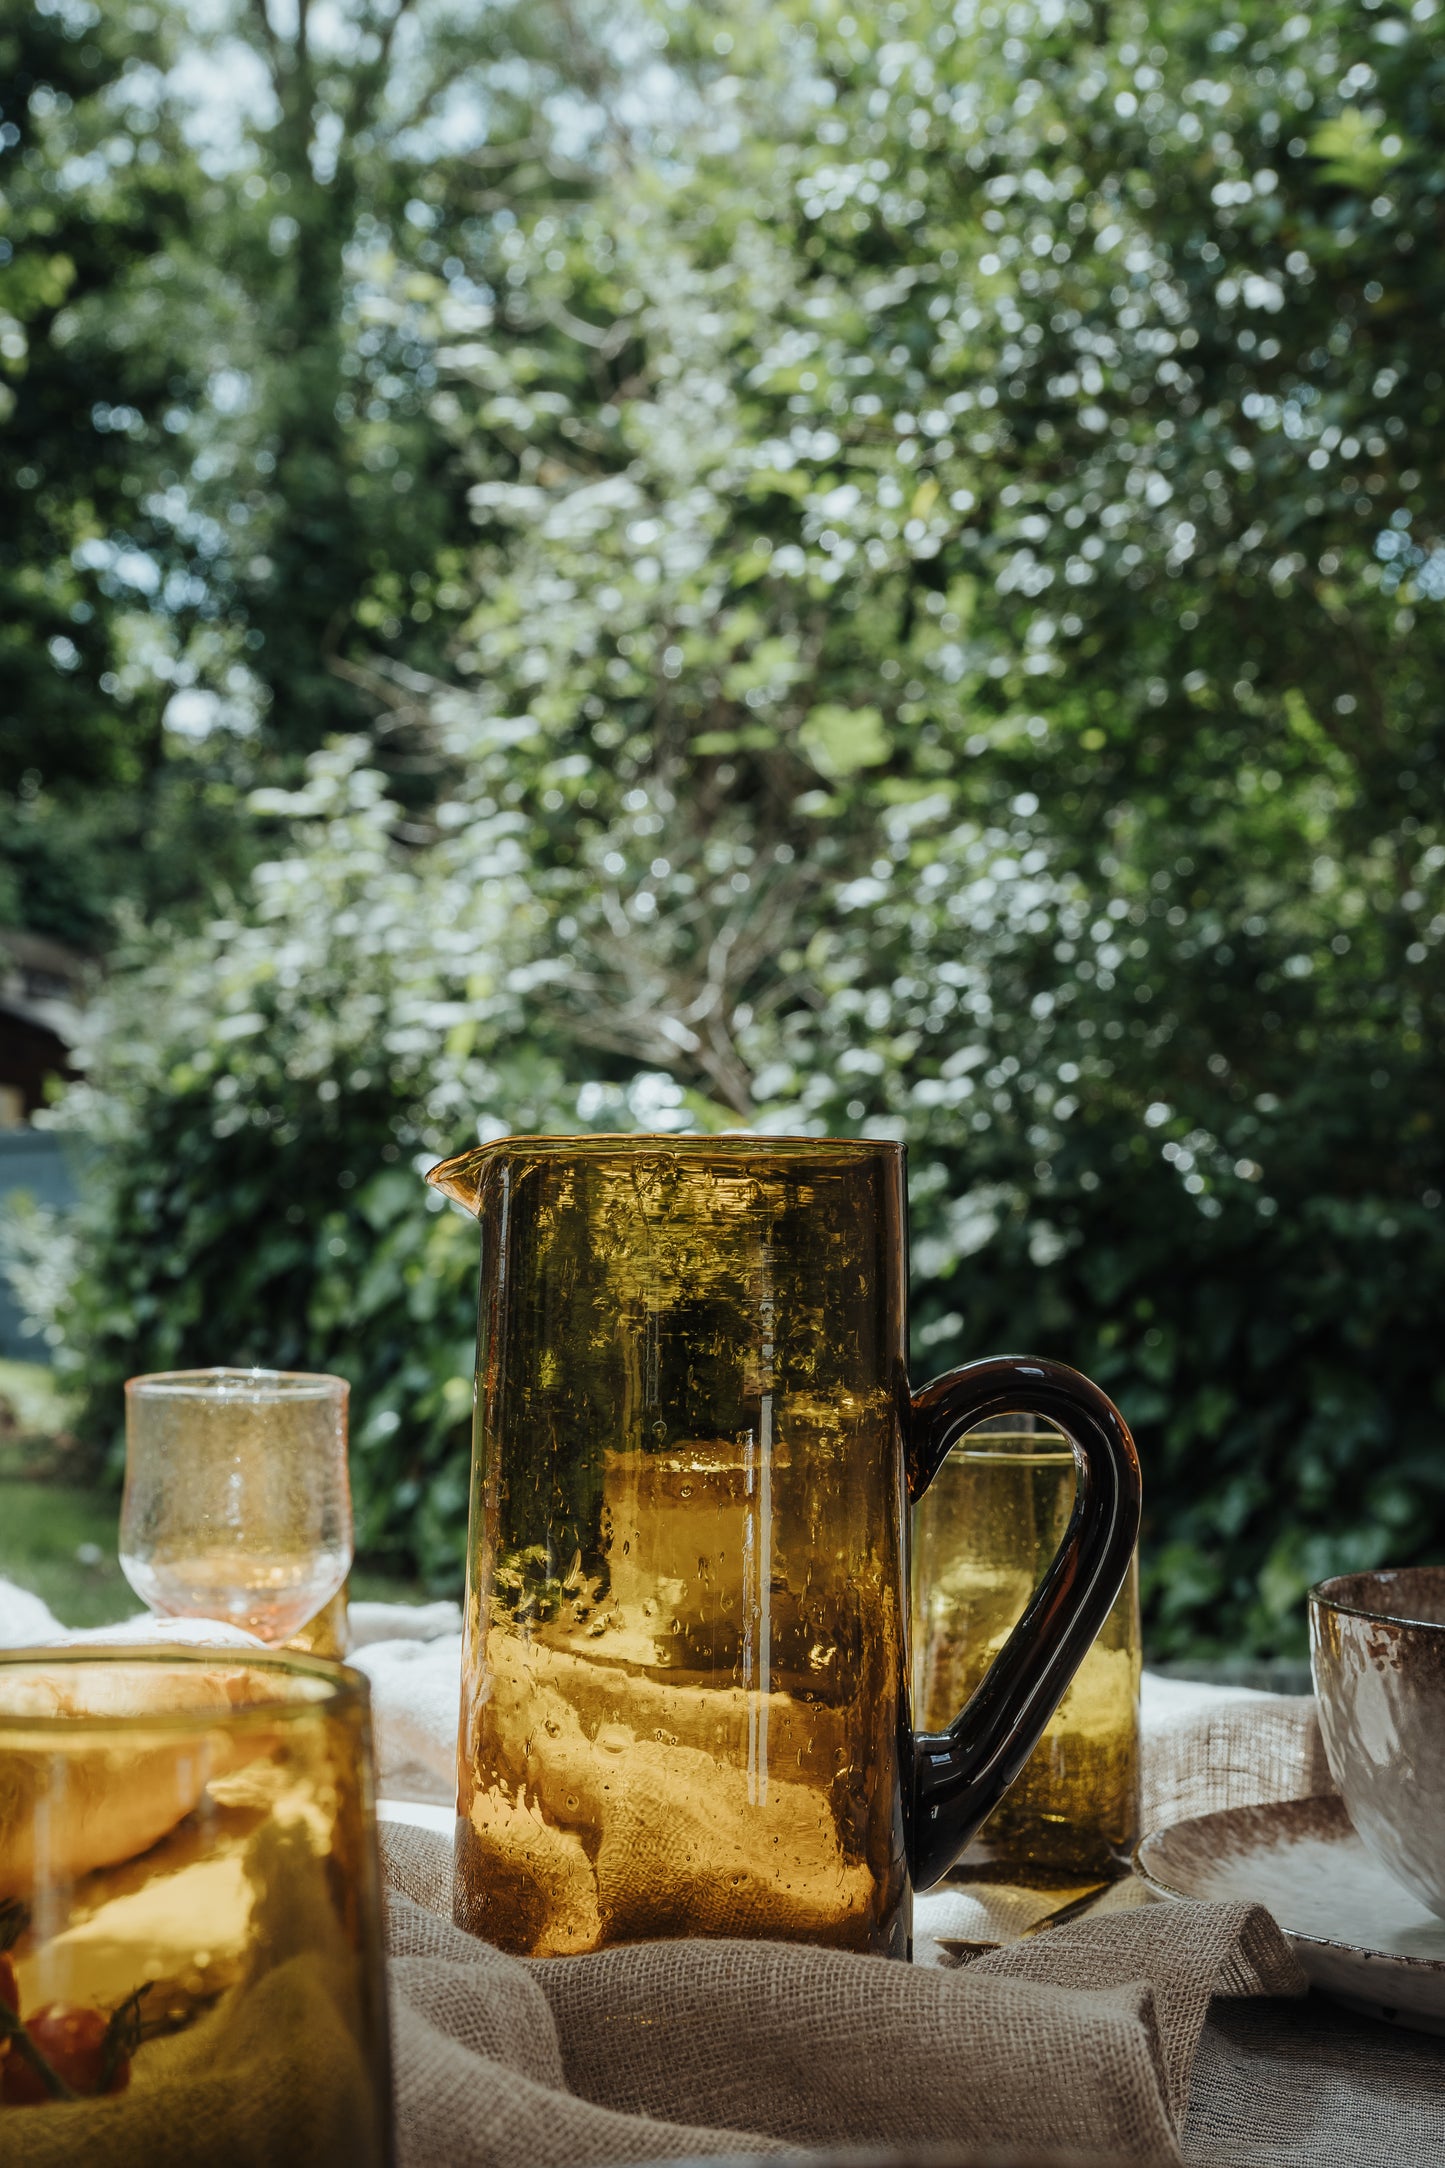 yellow brown glass jug with handle on a linen table cloth, with greenery in the background